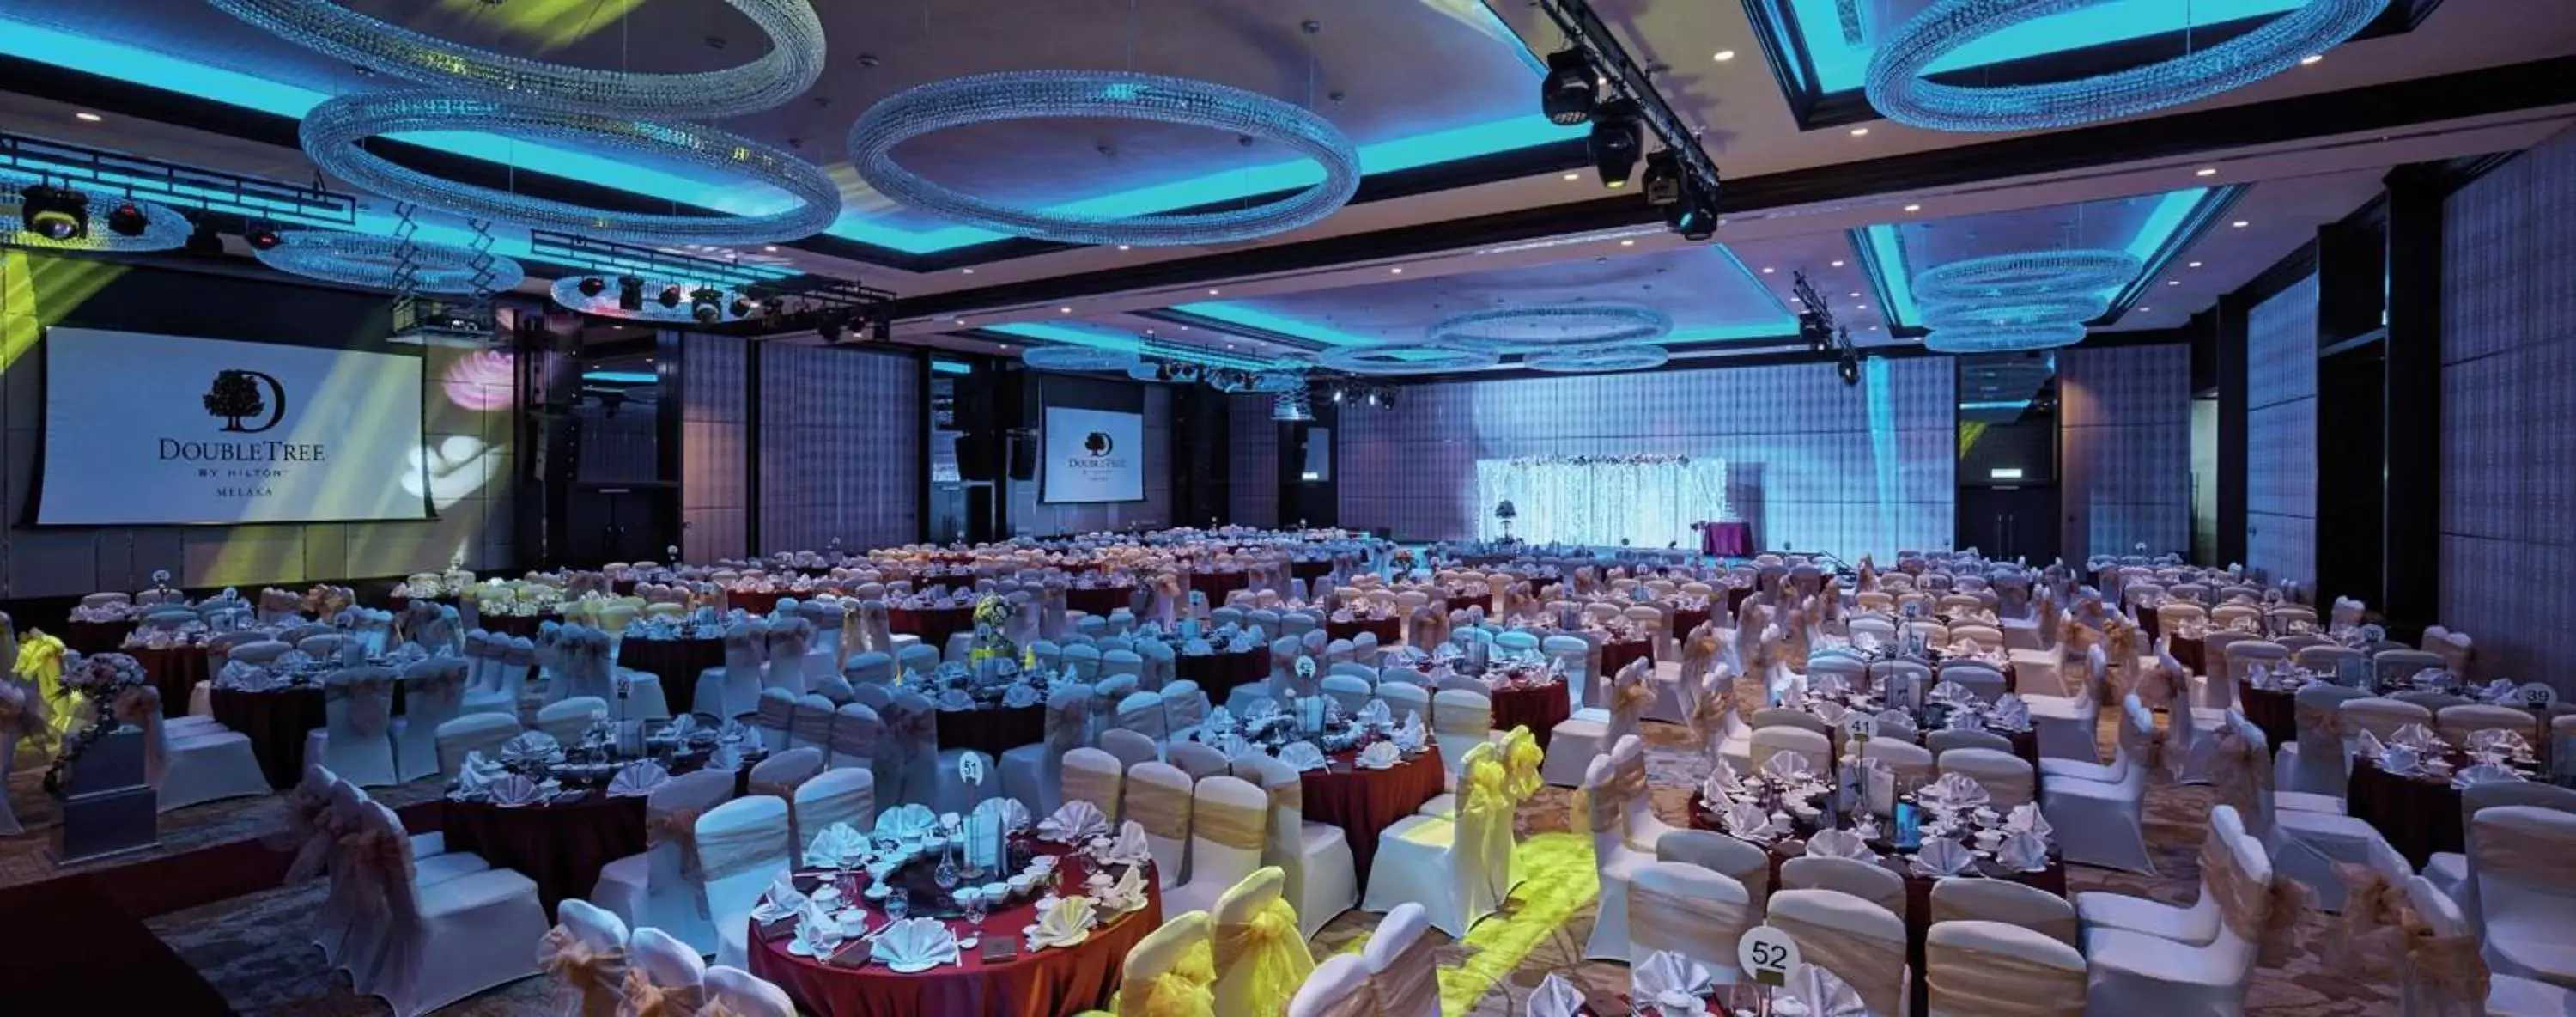 Meeting/conference room, Banquet Facilities in DoubleTree by Hilton Melaka